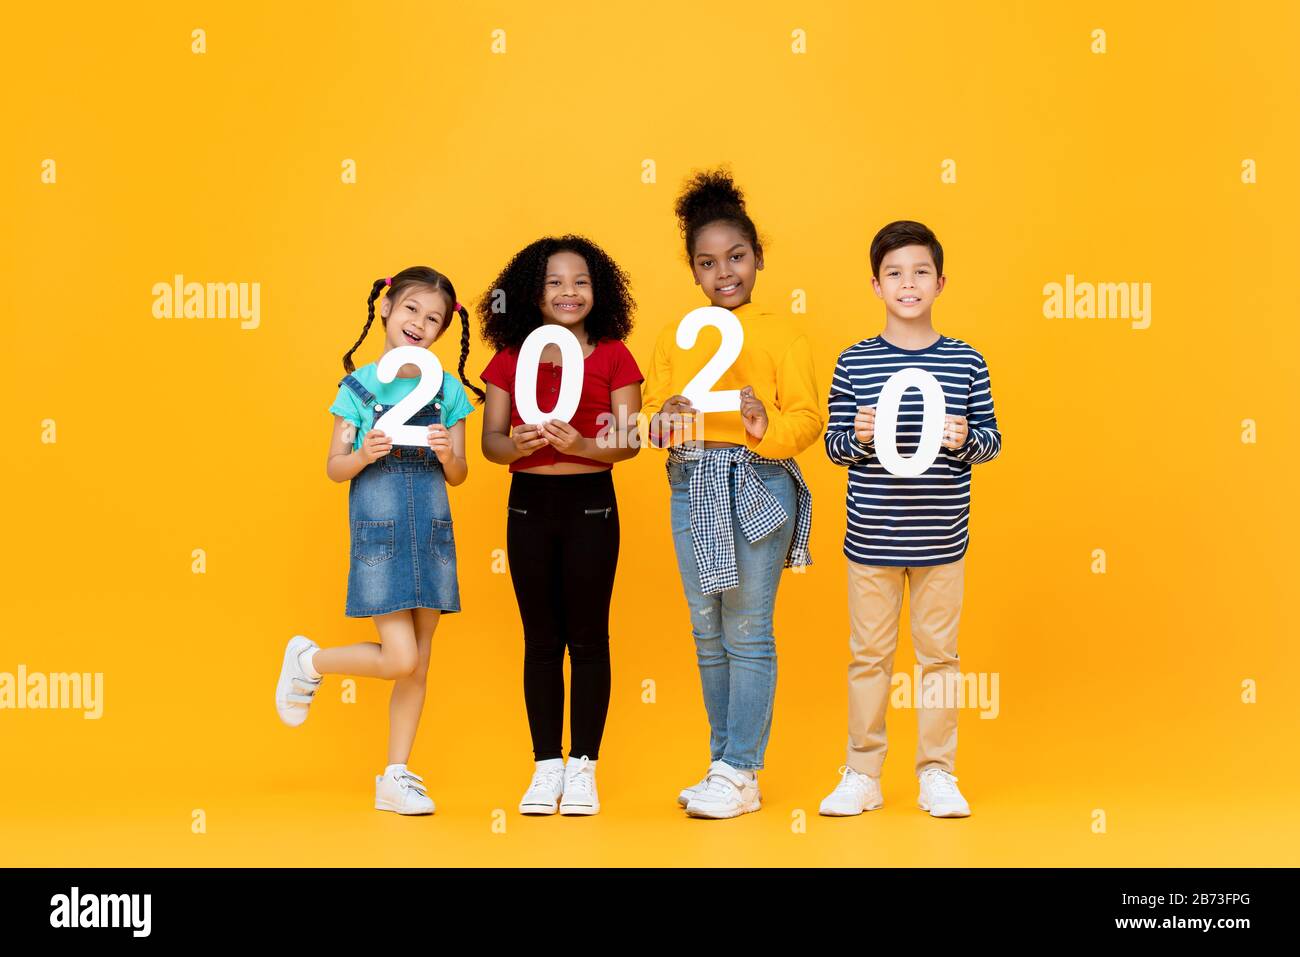 Cute mixed race kids smiling and holding 2020 numbers for new year concept isolated on yellow background Stock Photo